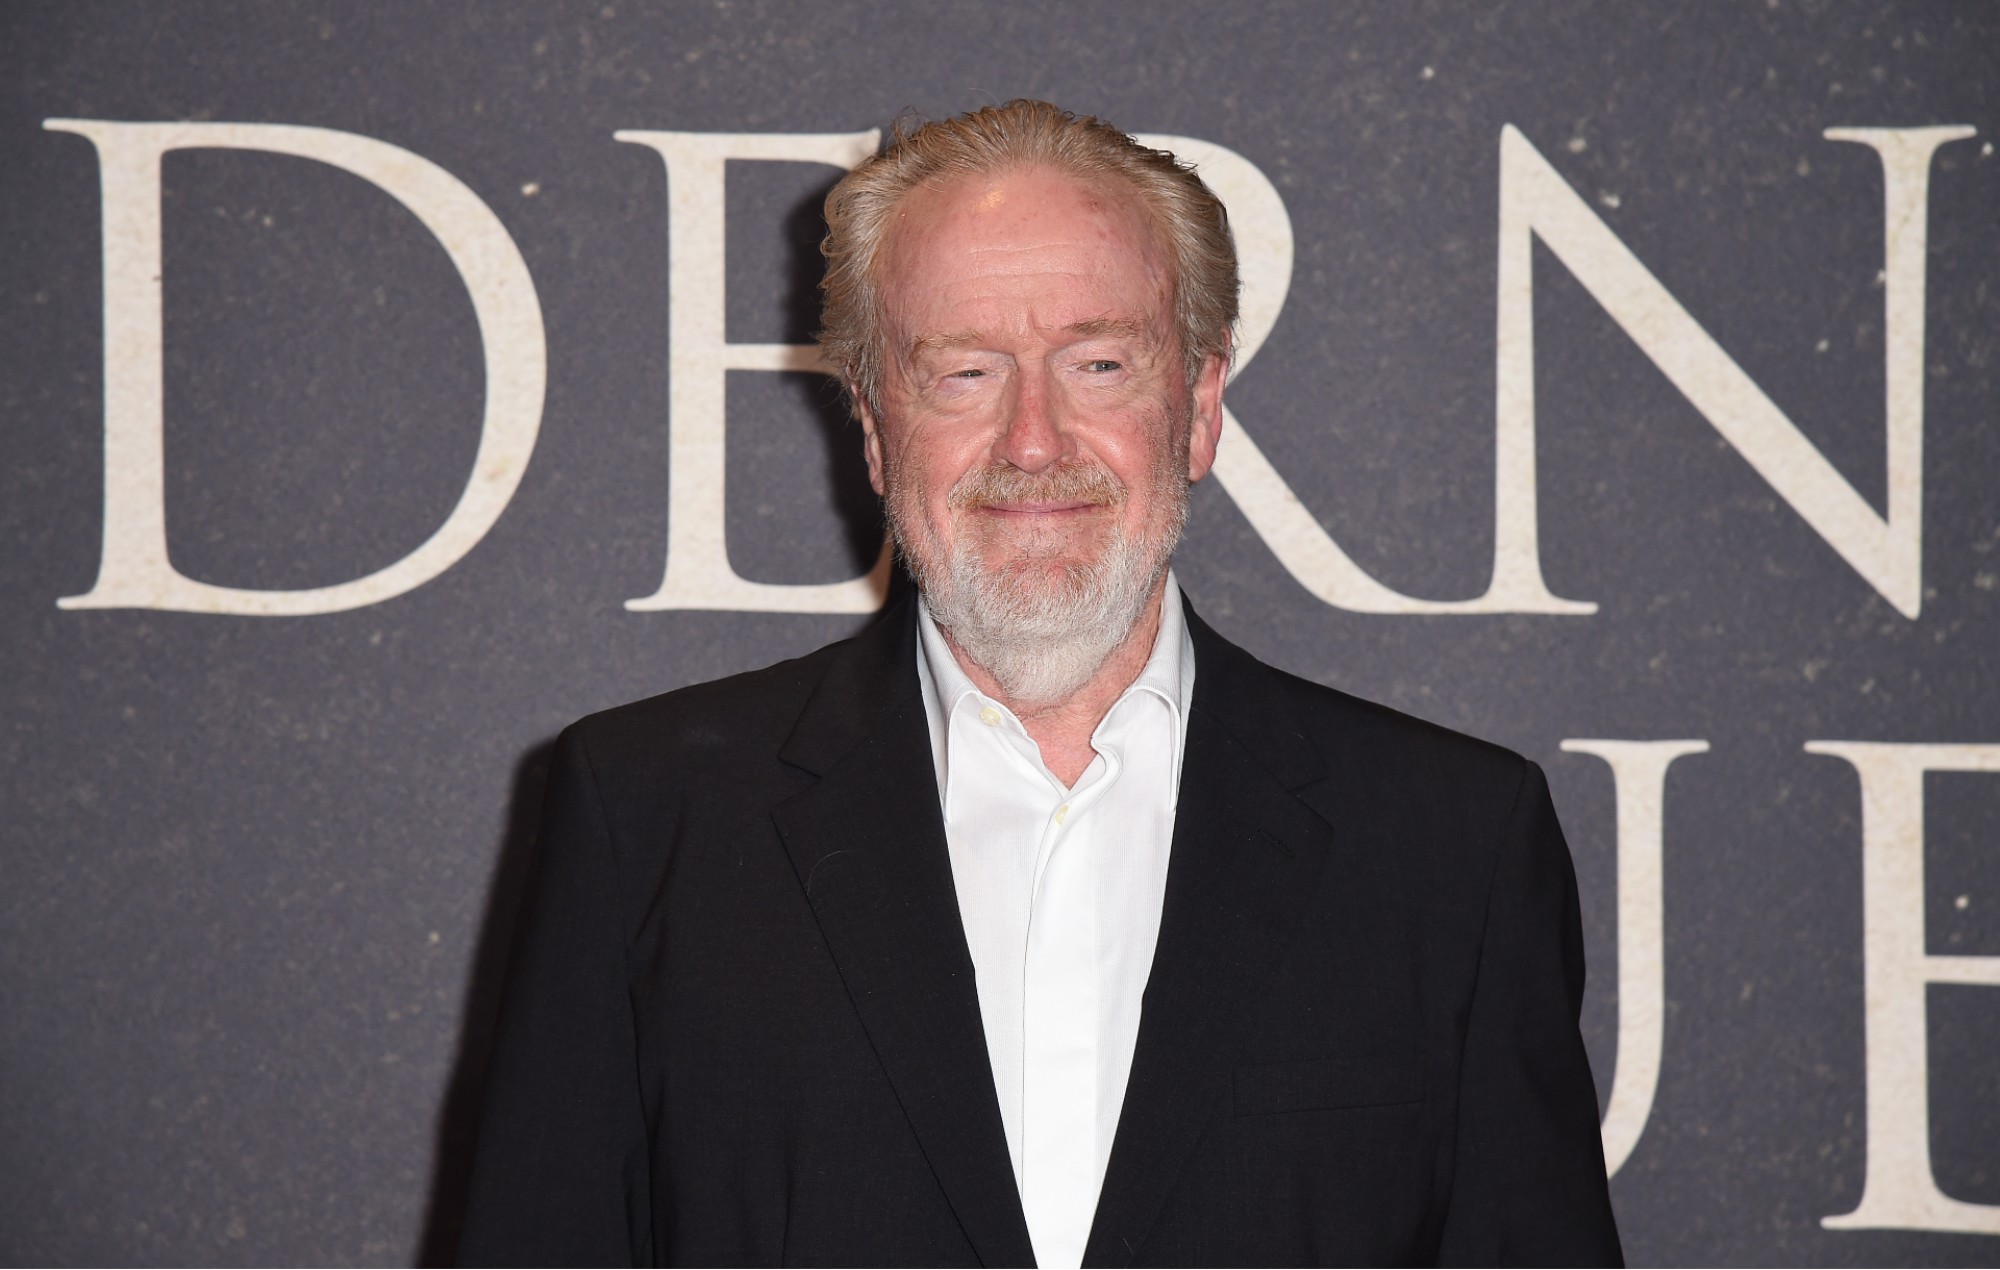 Ridley Scott Net Worth - Films That Made Him One Of Hollywood's Richest Directors